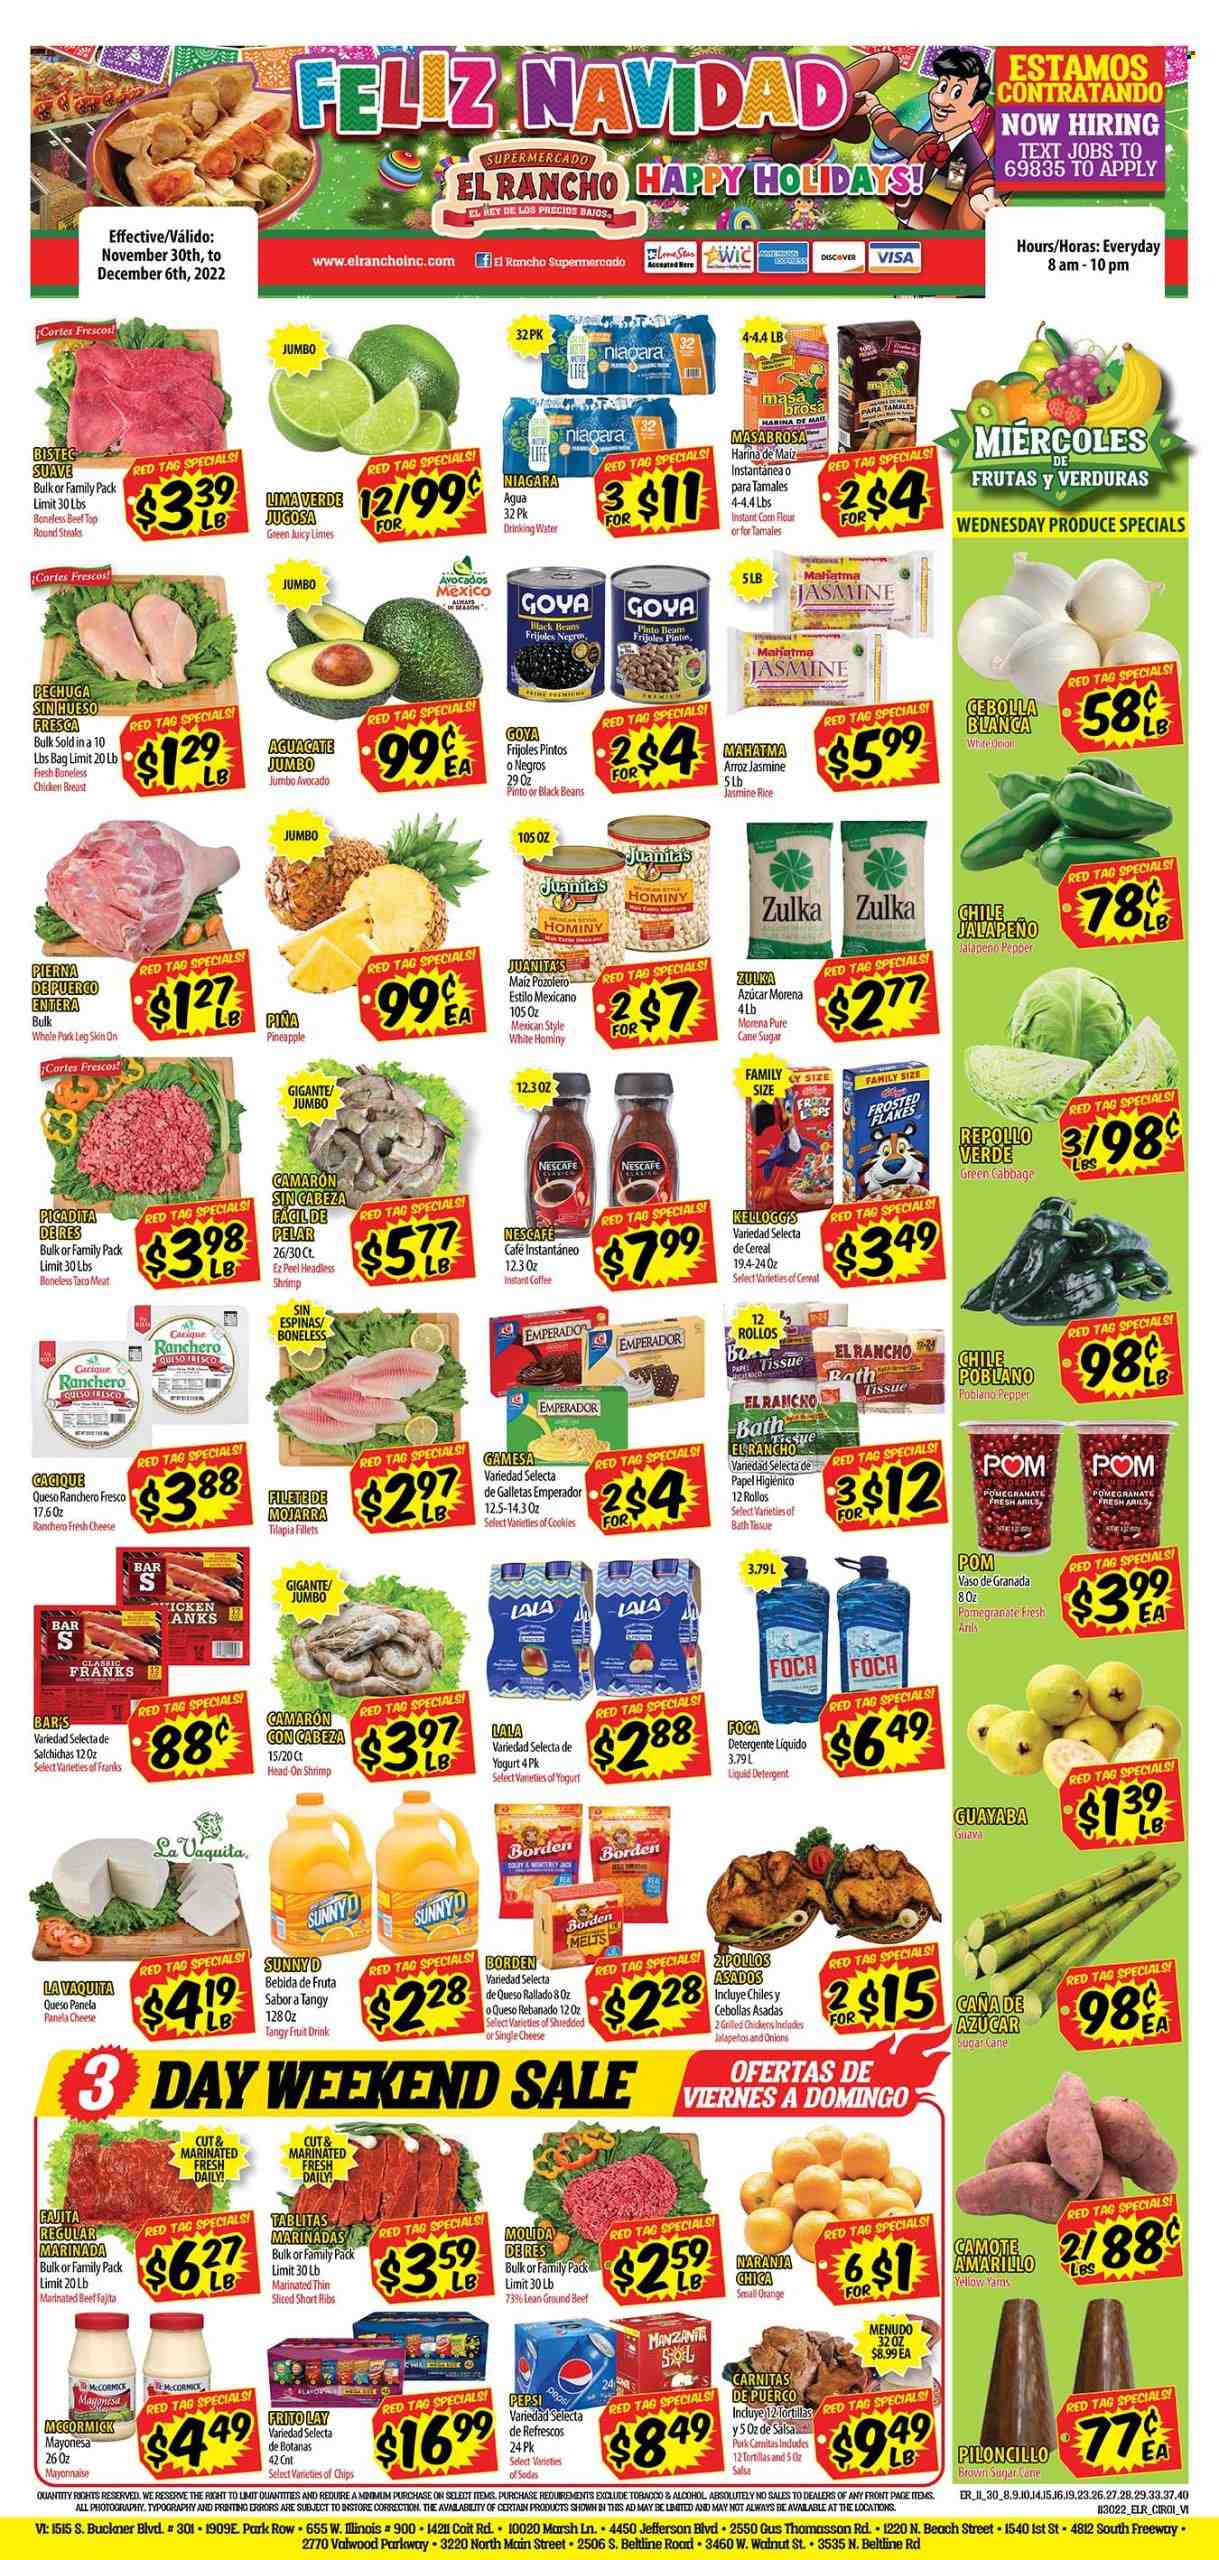 thumbnail - El Rancho Flyer - 11/30/2022 - 12/06/2022 - Sales products - tortillas, cabbage, corn, jalapeño, avocado, limes, pineapple, oranges, sugar cane, tilapia, shrimps, fajita, Colby cheese, Monterey Jack cheese, queso fresco, cheese, Panela cheese, yoghurt, mayonnaise, cookies, Kellogg's, chips, Mexicano, cane sugar, corn flour, black beans, pinto beans, Goya, cereals, rice, jasmine rice, salsa, Pepsi, fruit drink, instant coffee, Nescafé, alcohol, Sol, chicken breasts, beef meat, ground beef, steak, marinated beef, pork meat, pork leg, pomegranate. Page 1.